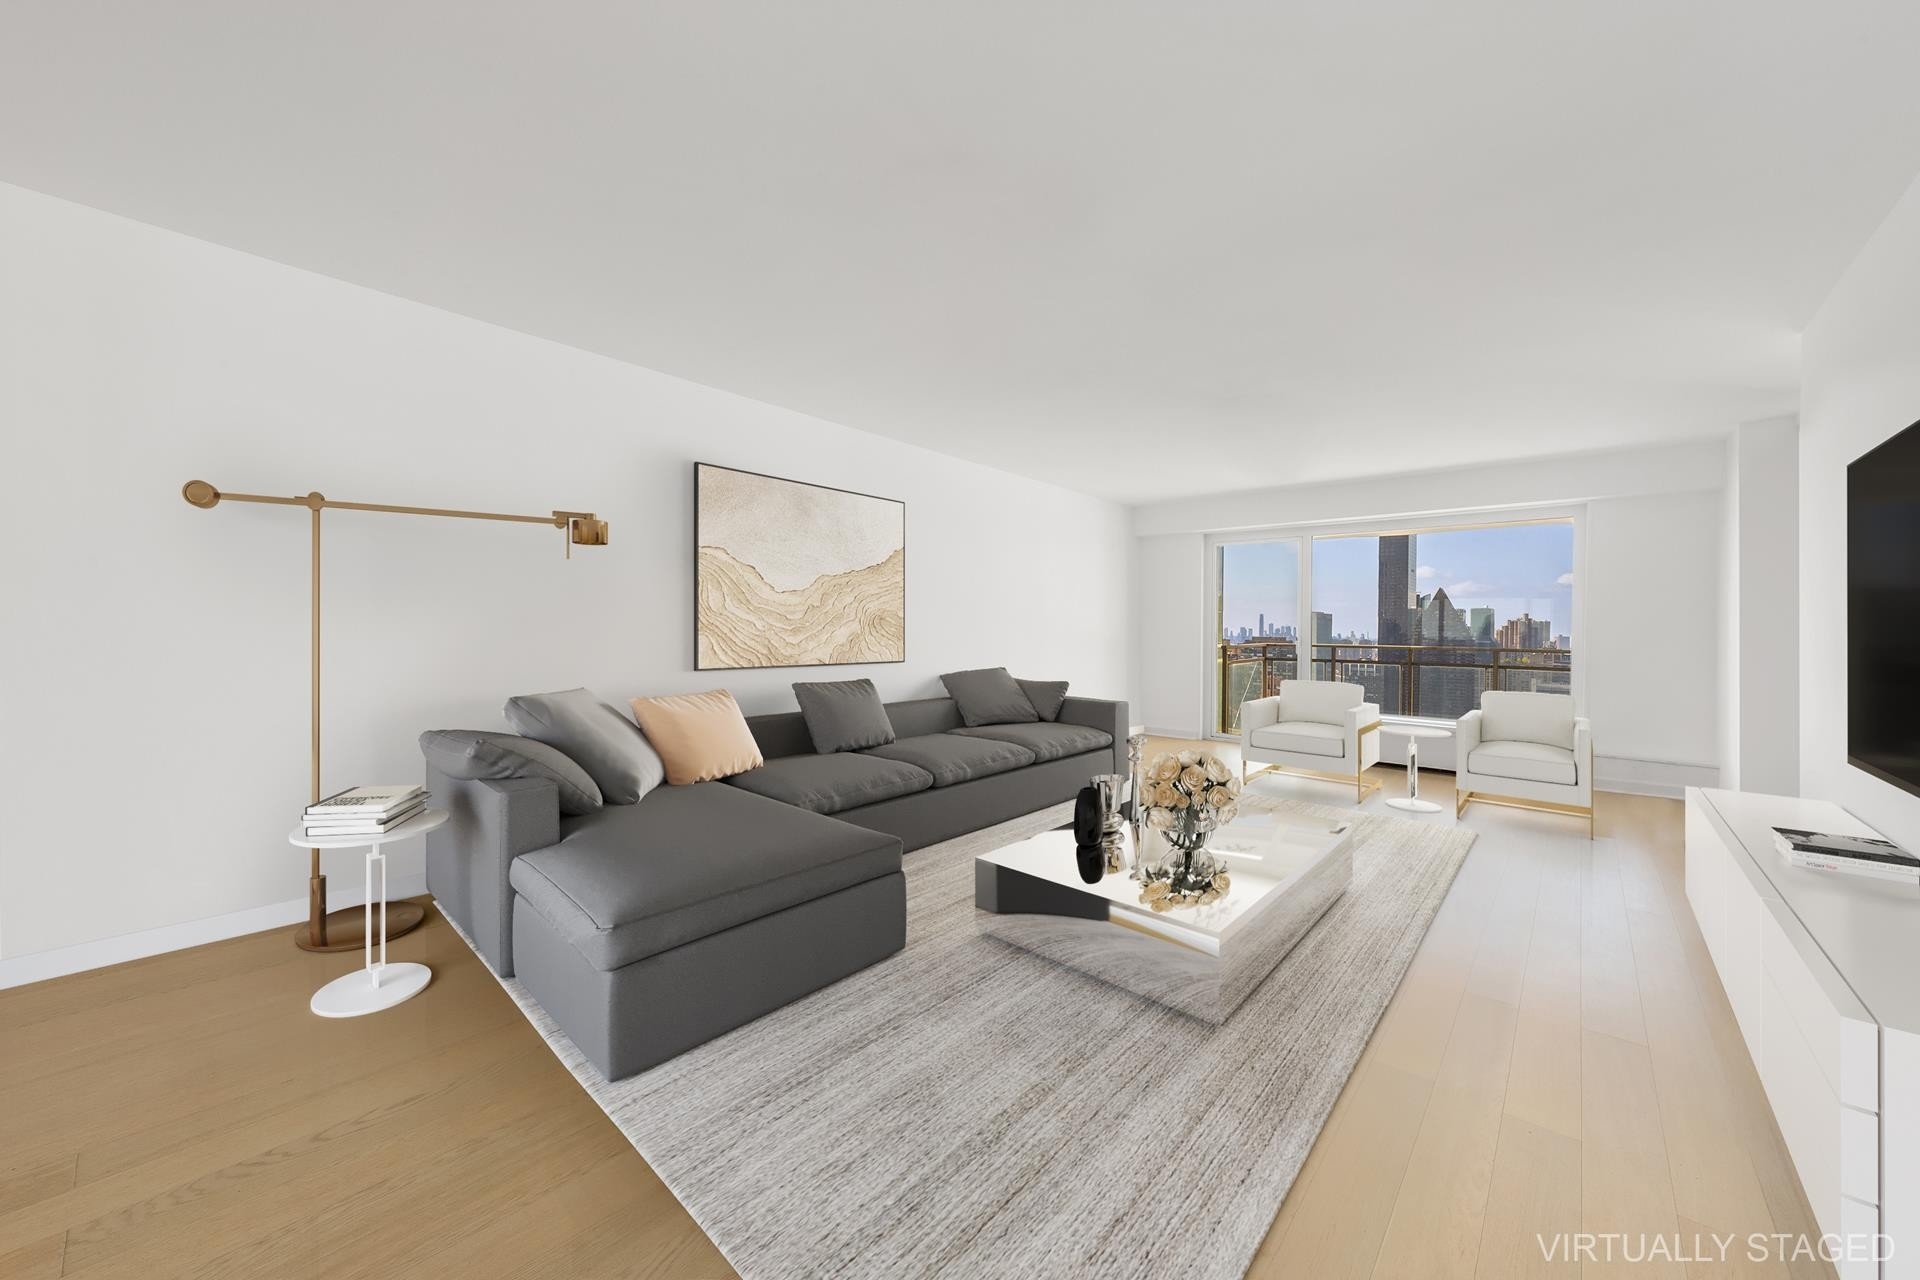 Property at The Excelsior, 303 E 57TH ST, 41G Midtown East, New York, New York 10022